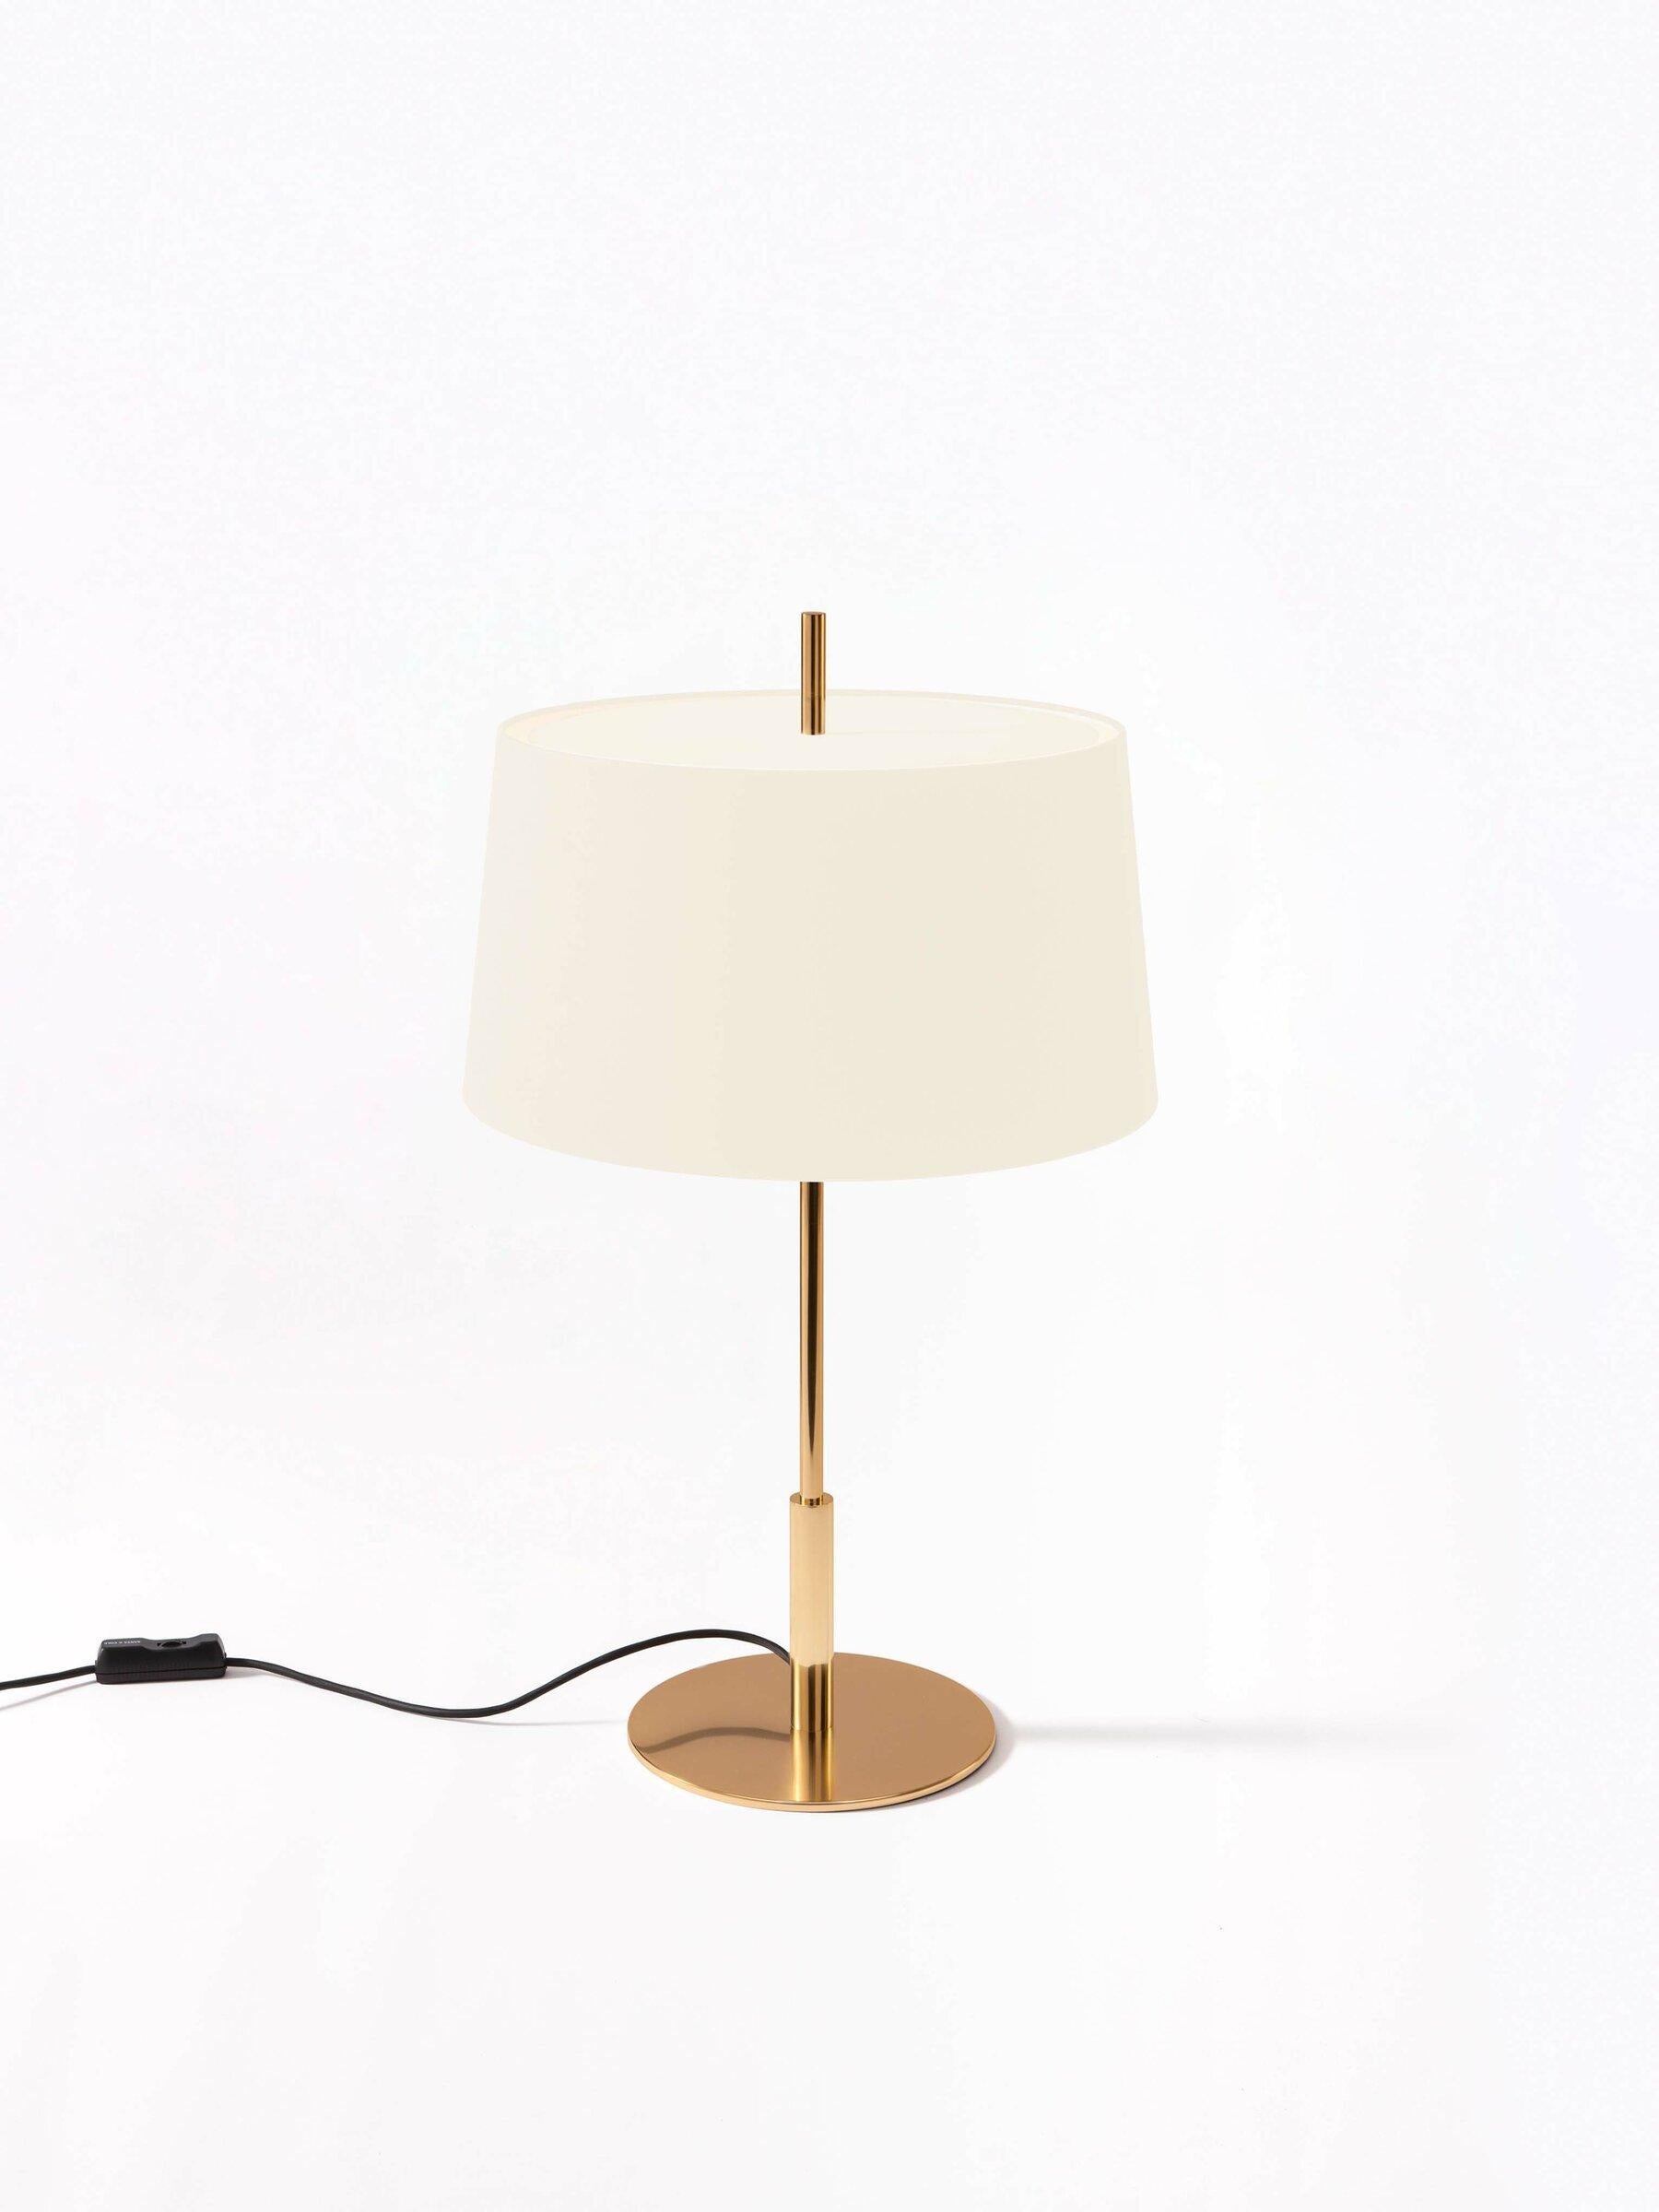 Gold Diana table lamp by Federico Correa, Alfonso Milá, Miguel Milá
Dimensions: D 45 x H 78 cm.
Materials: white linen, metal.
Available in black or white lampshade and in gold or nickel finish.

In keeping with the calling of its creators, the